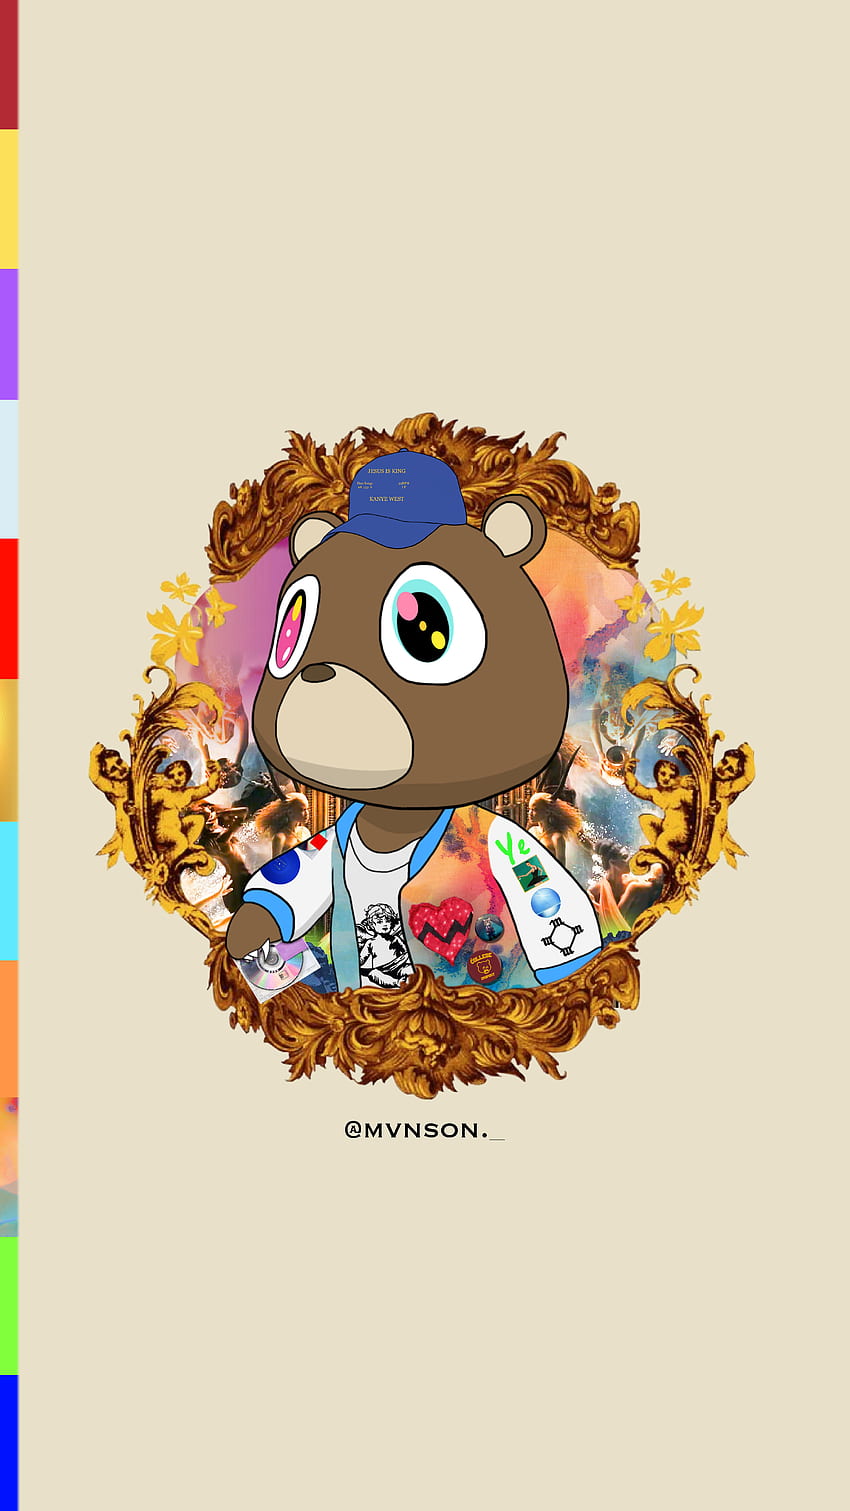 Posted my dropout bear art here yesterday and you guys seemed to, College Dropout HD phone wallpaper